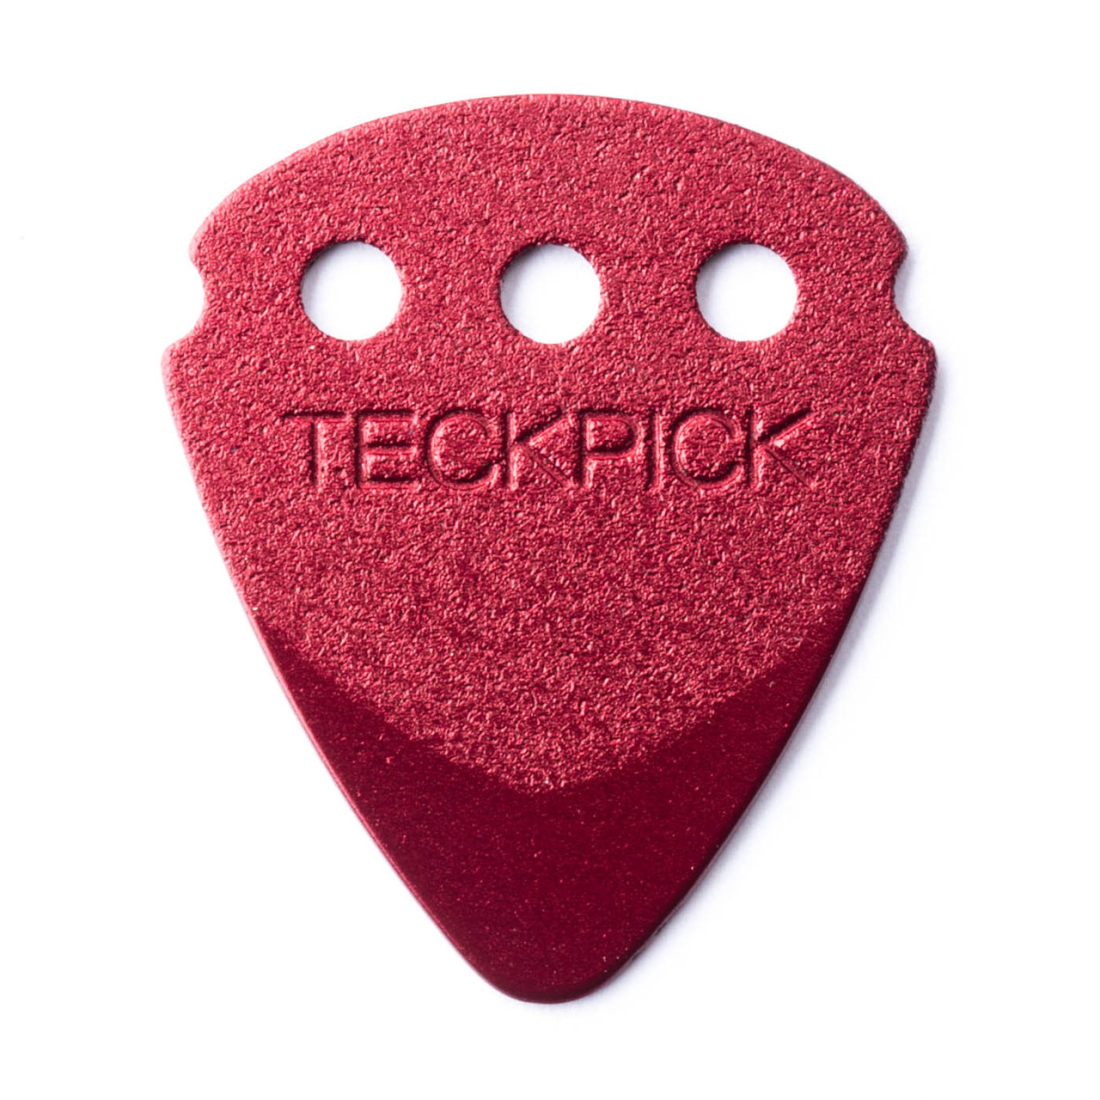 TECKPICK Players Pack (12 Pack) - Red